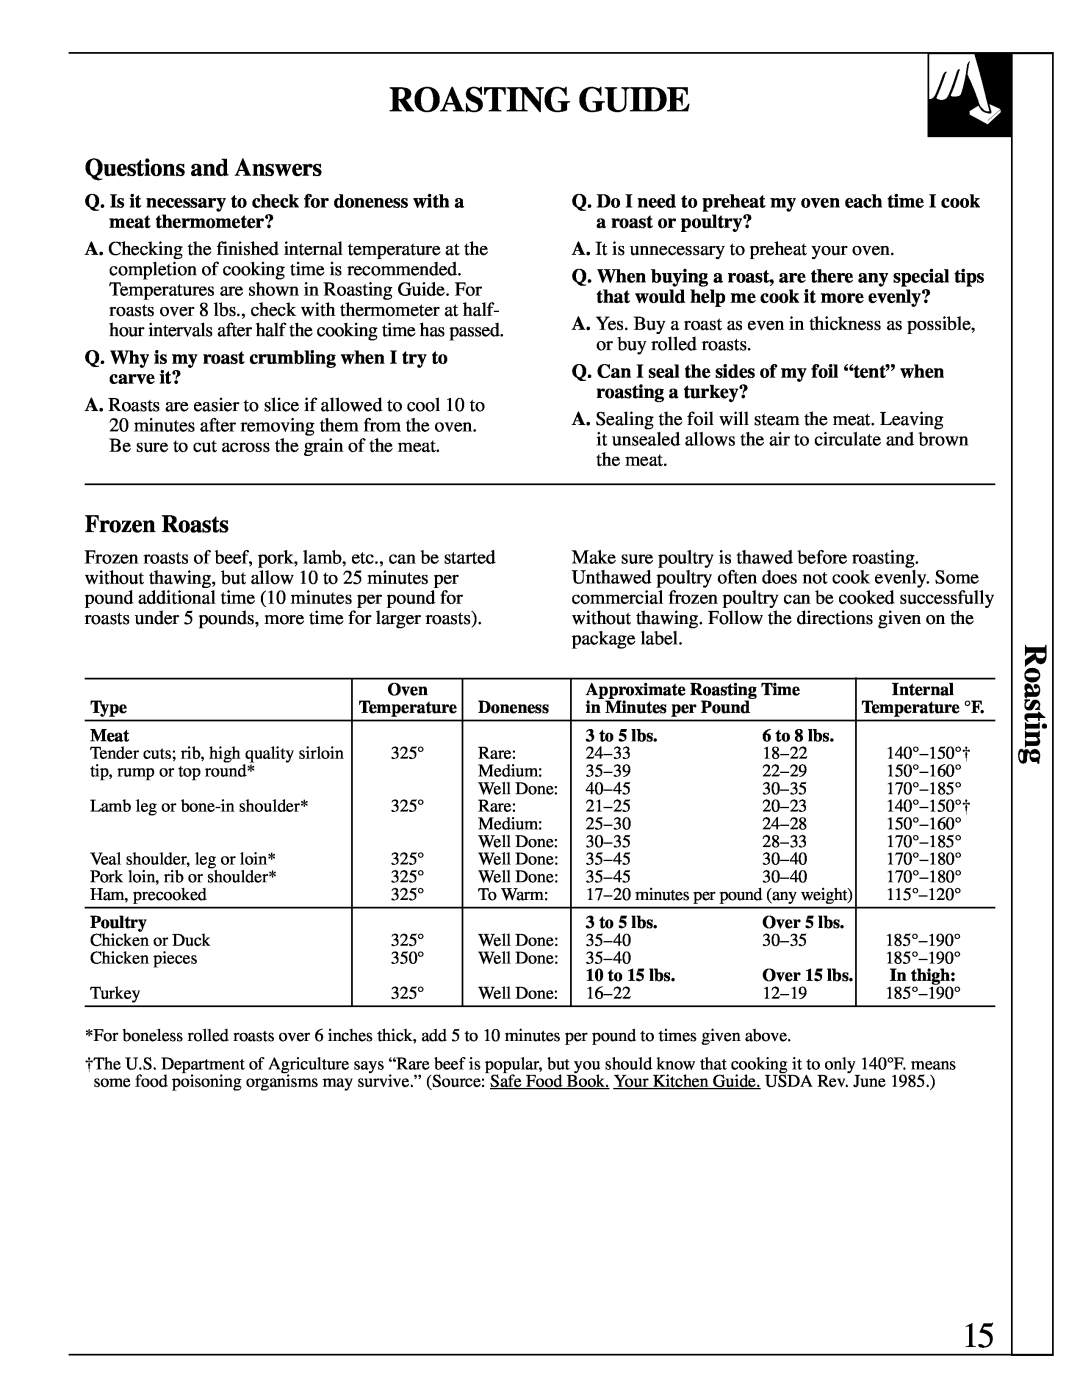 GE 164D2966P079, JGBP19 warranty Roasting Guide, Questions and Answers, Frozen Roasts 